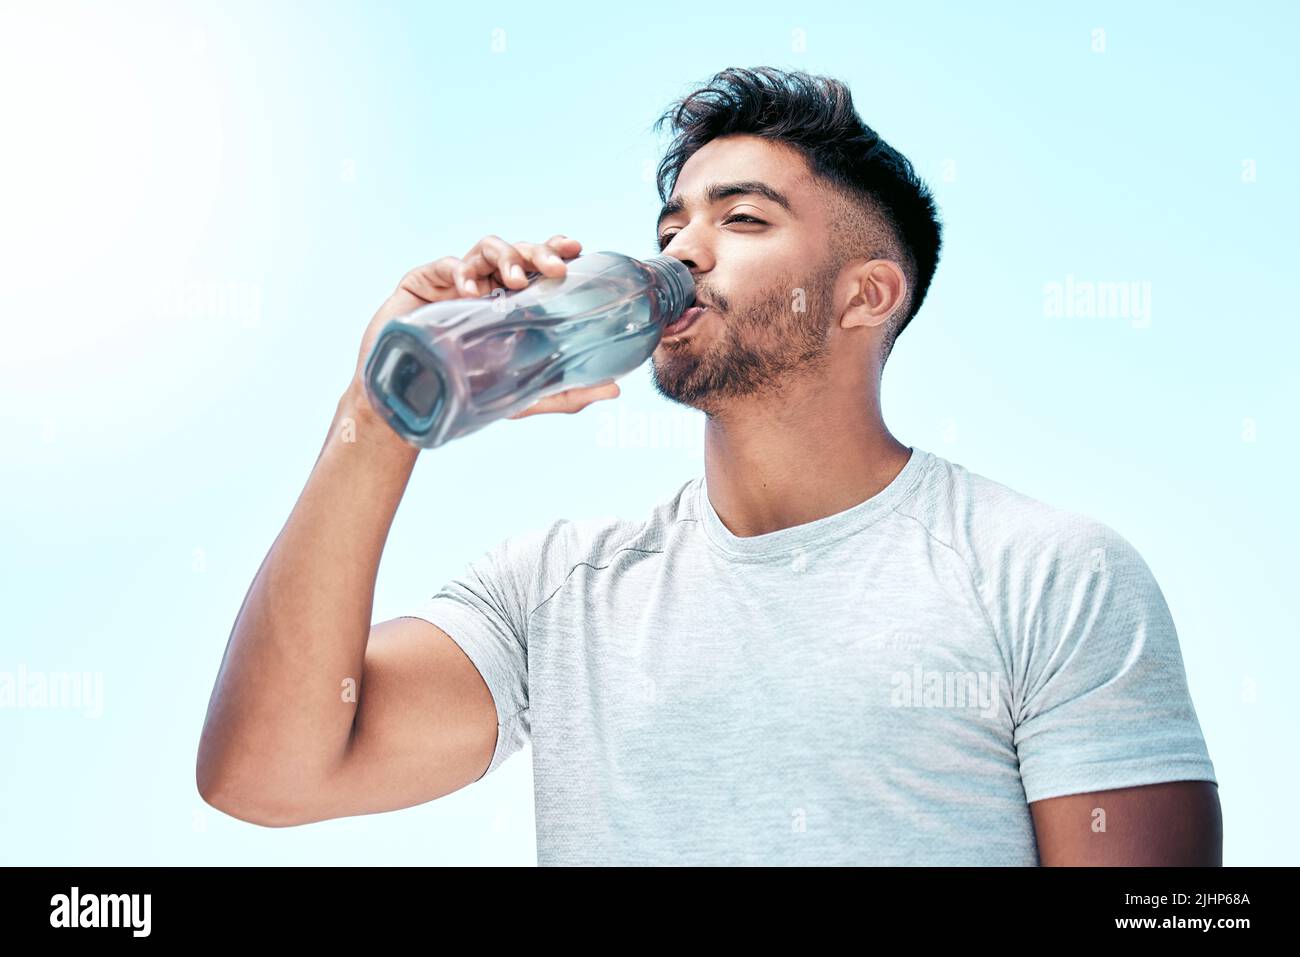 https://c8.alamy.com/comp/2JHP68A/fit-young-mixed-race-man-drinking-water-from-a-bottle-while-exercising-outdoors-handsome-hispanic-male-taking-a-sip-of-water-during-a-break-from-his-2JHP68A.jpg